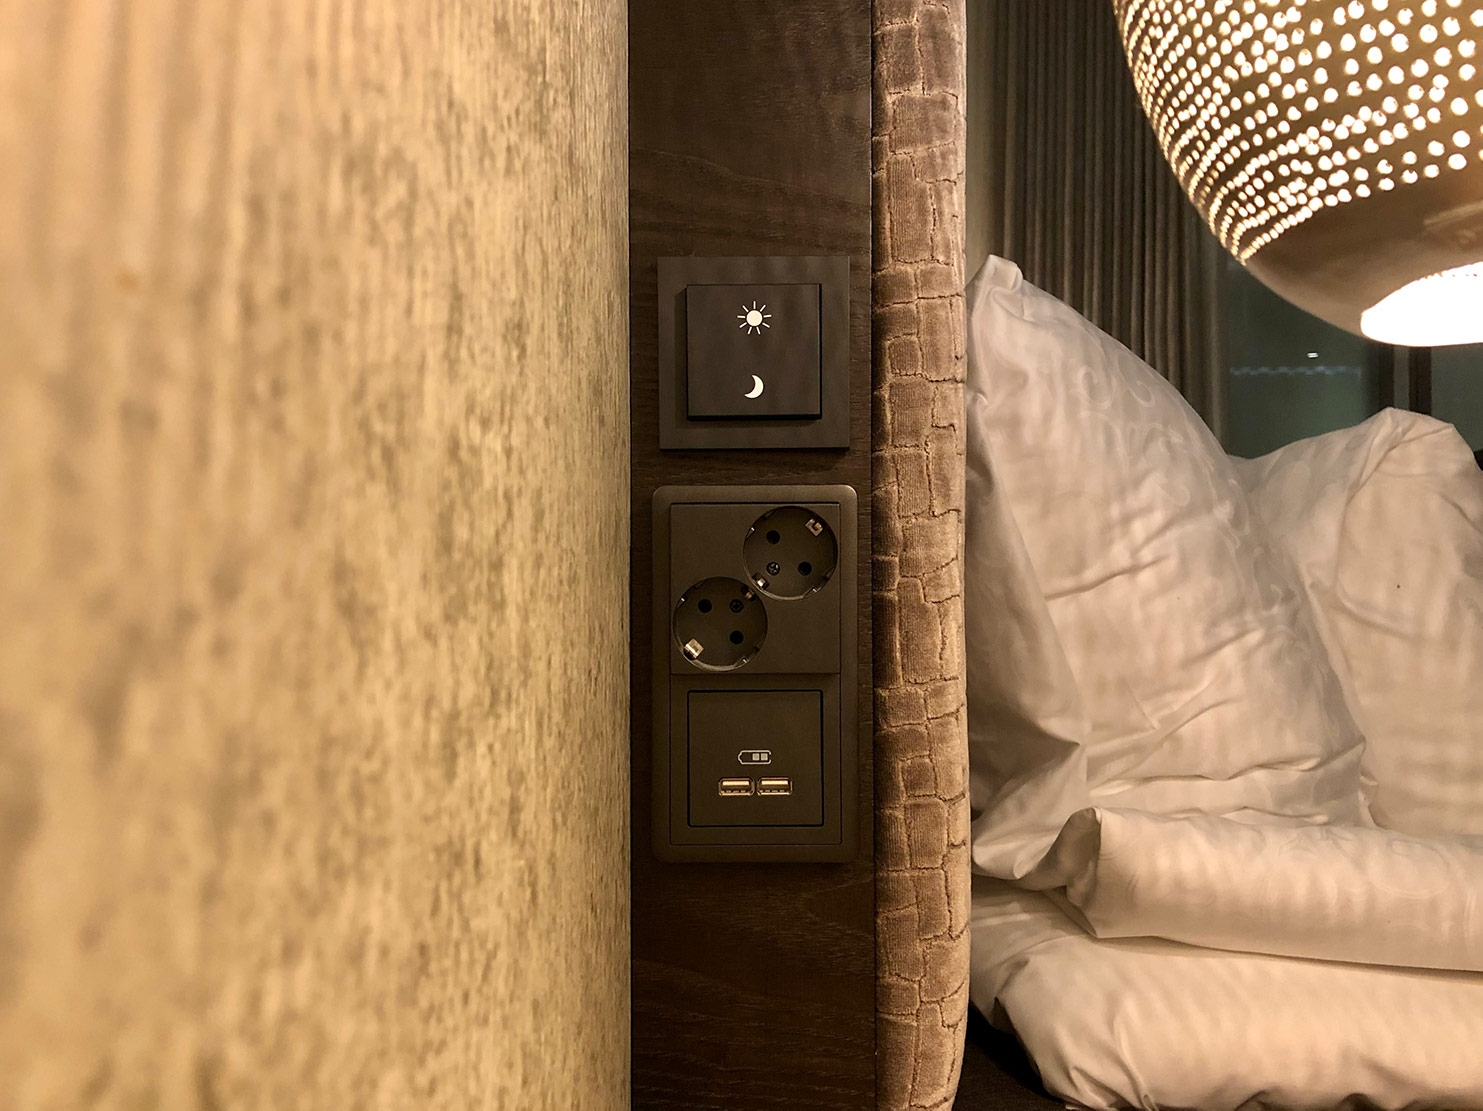 Bedside switches